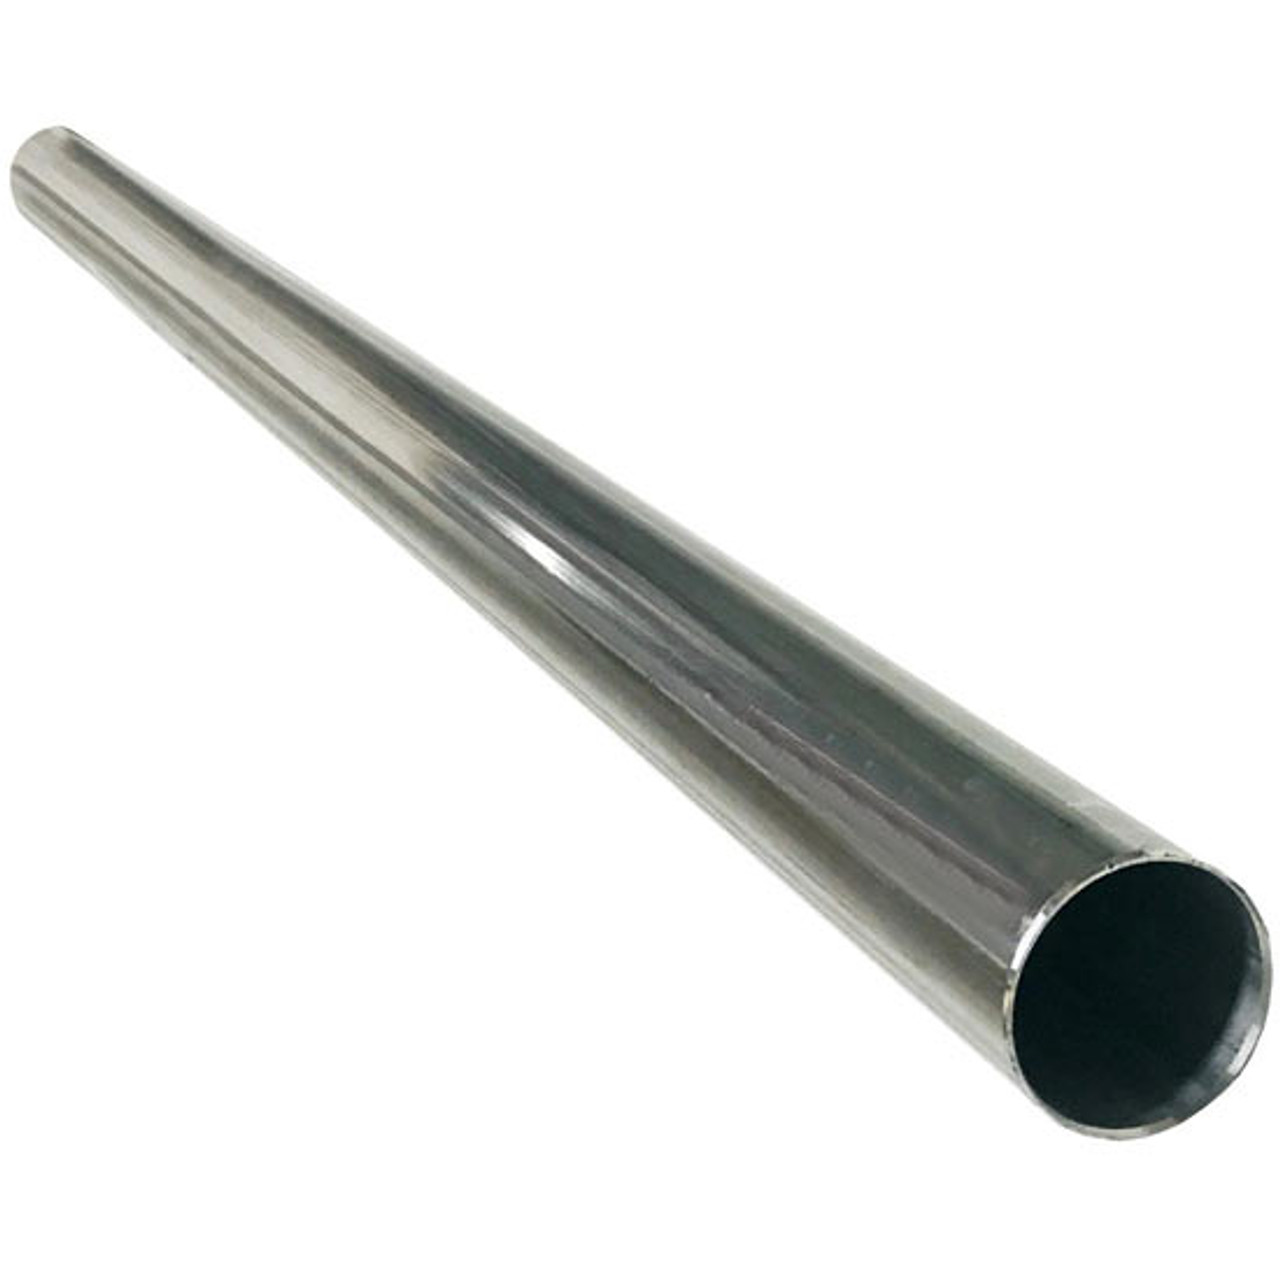 TPHD 4 Inch ID Stainless Steel Flex Pipe